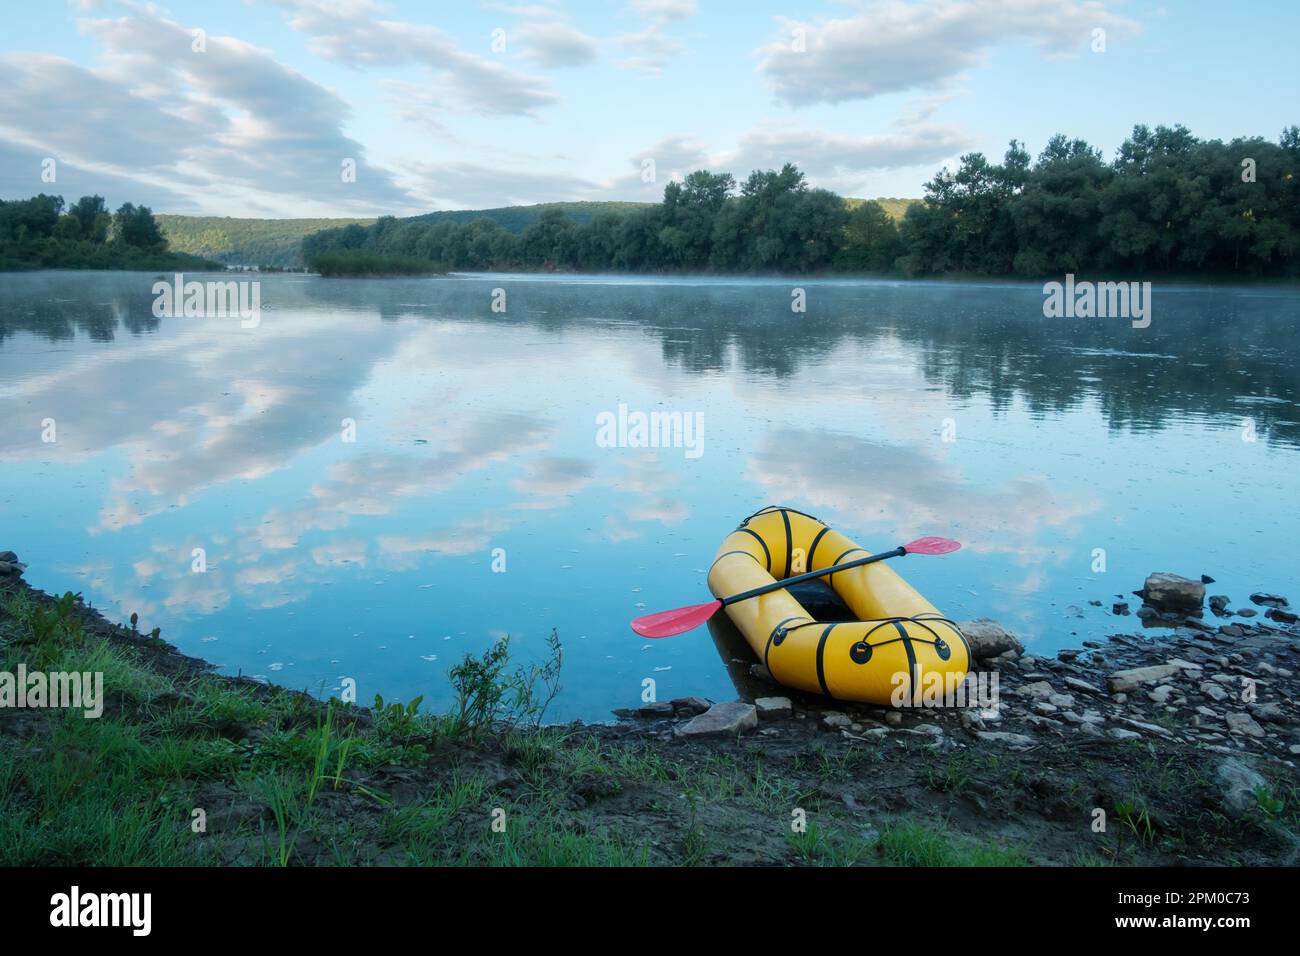 Yellow packraft rubber boat with red padle on a sunrise river. Packrafting. Active lifestile concept Stock Photo